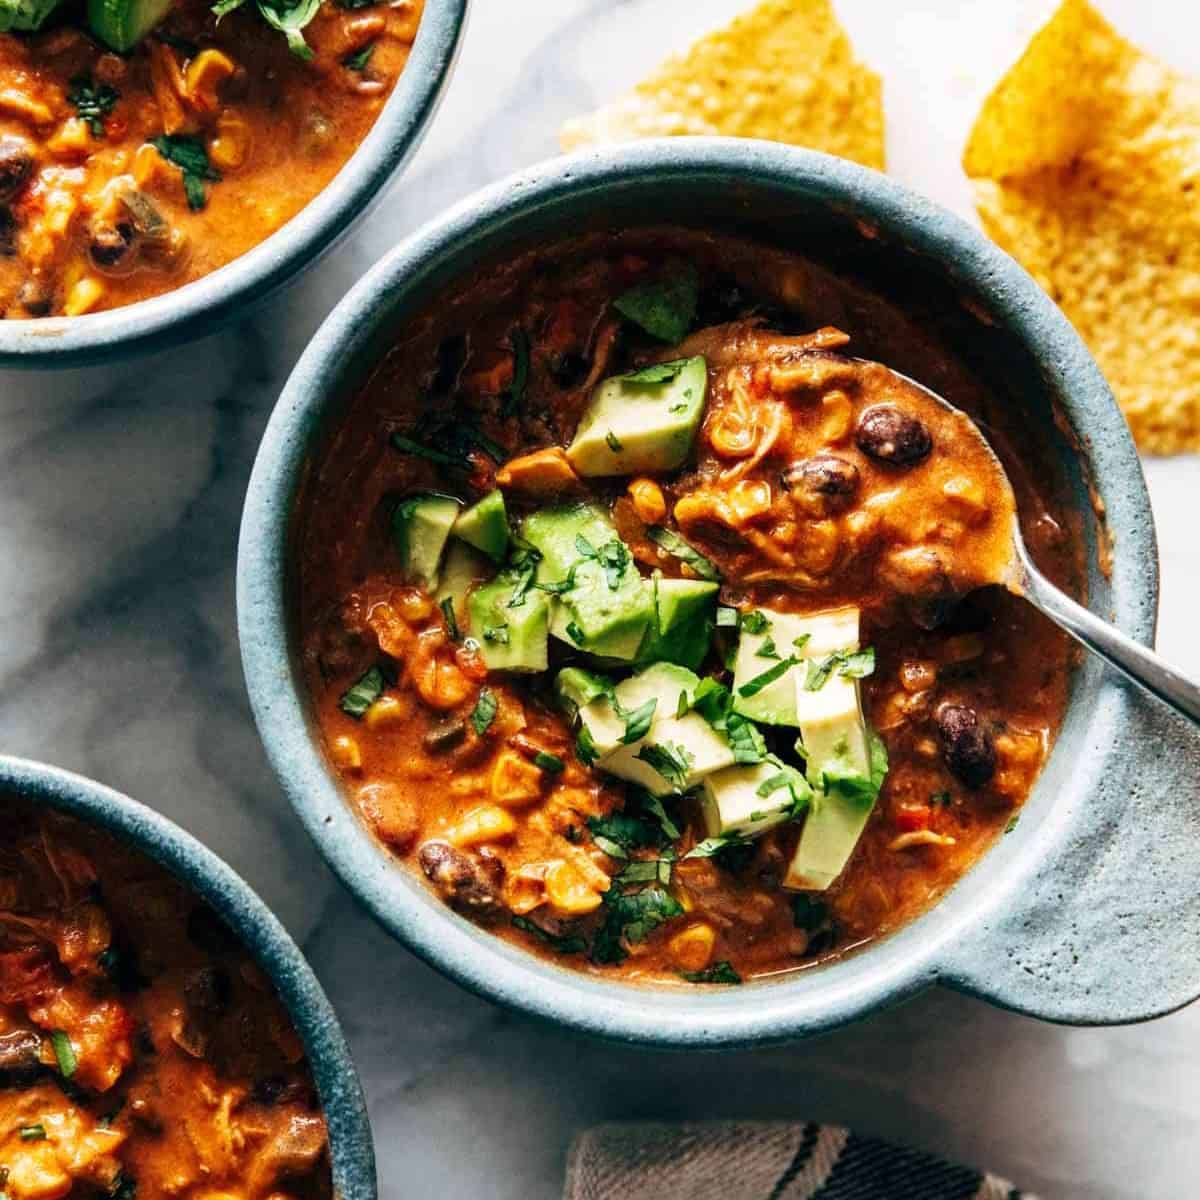 Queso chicken chili topped with avocado in a grey bowl.